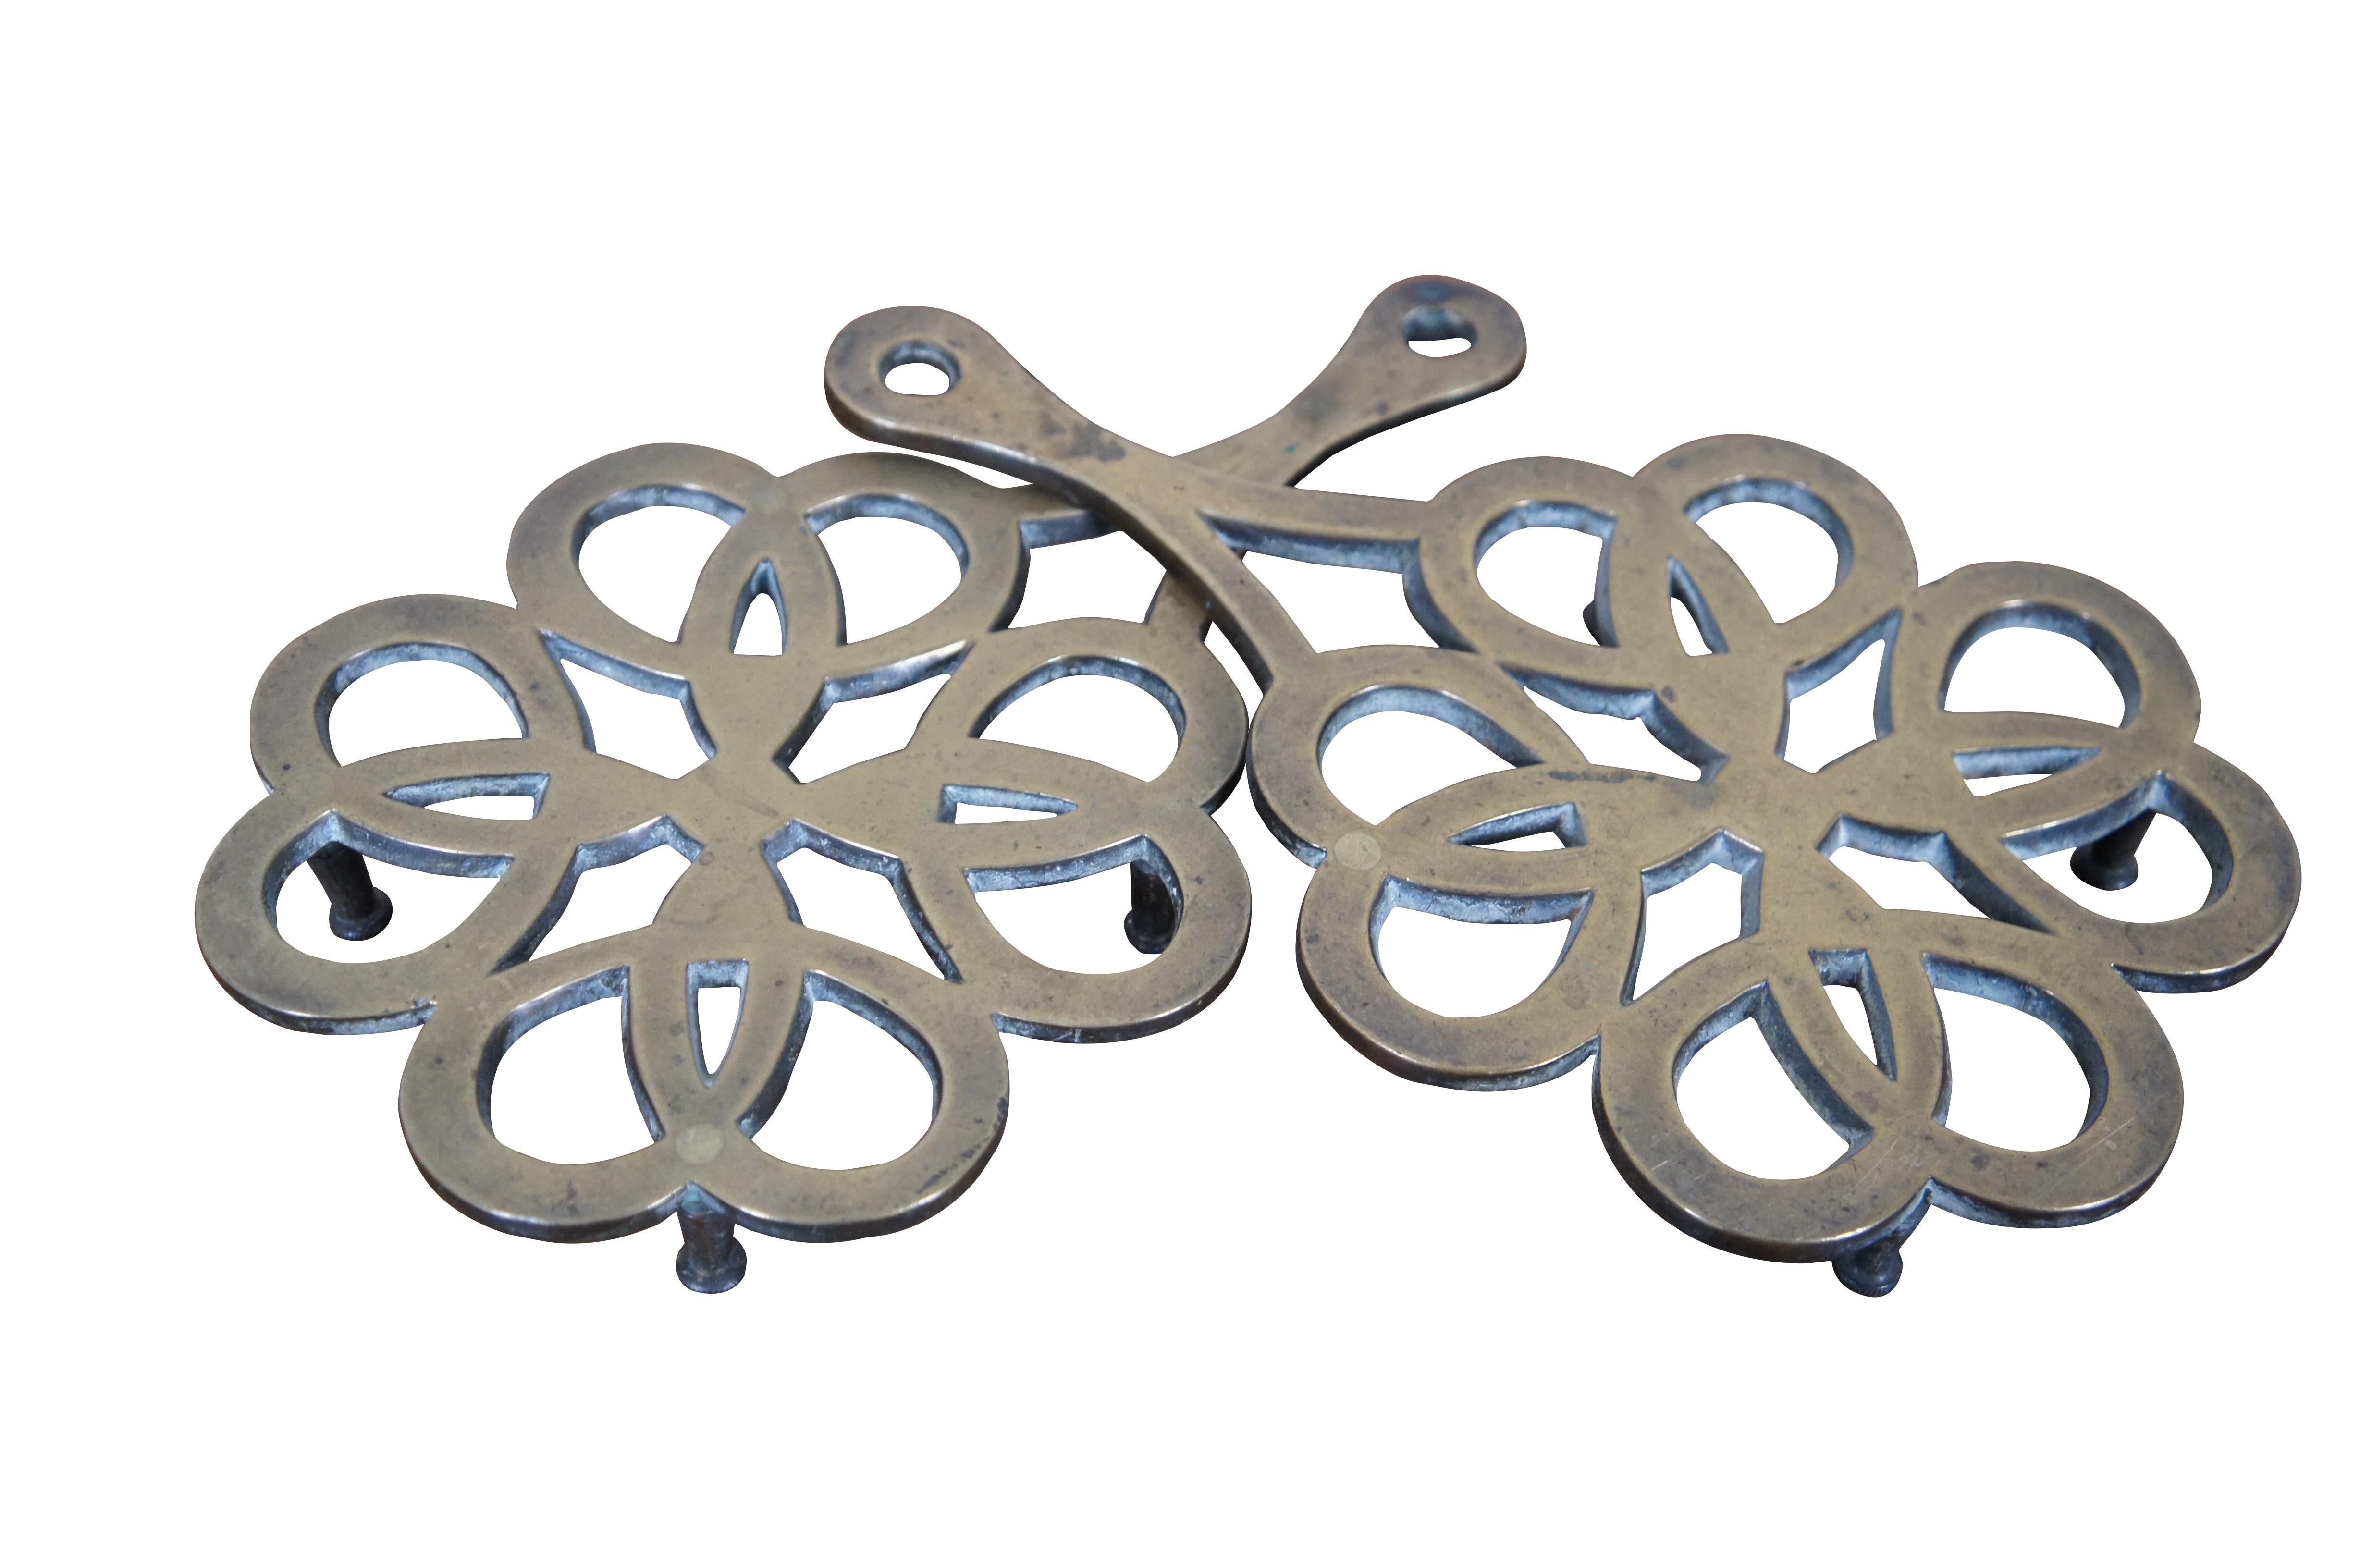 Two antique brass fireplace trivets / kettle rests featuring a reticulated pierced floral design with footed base.

Dimensions:
10